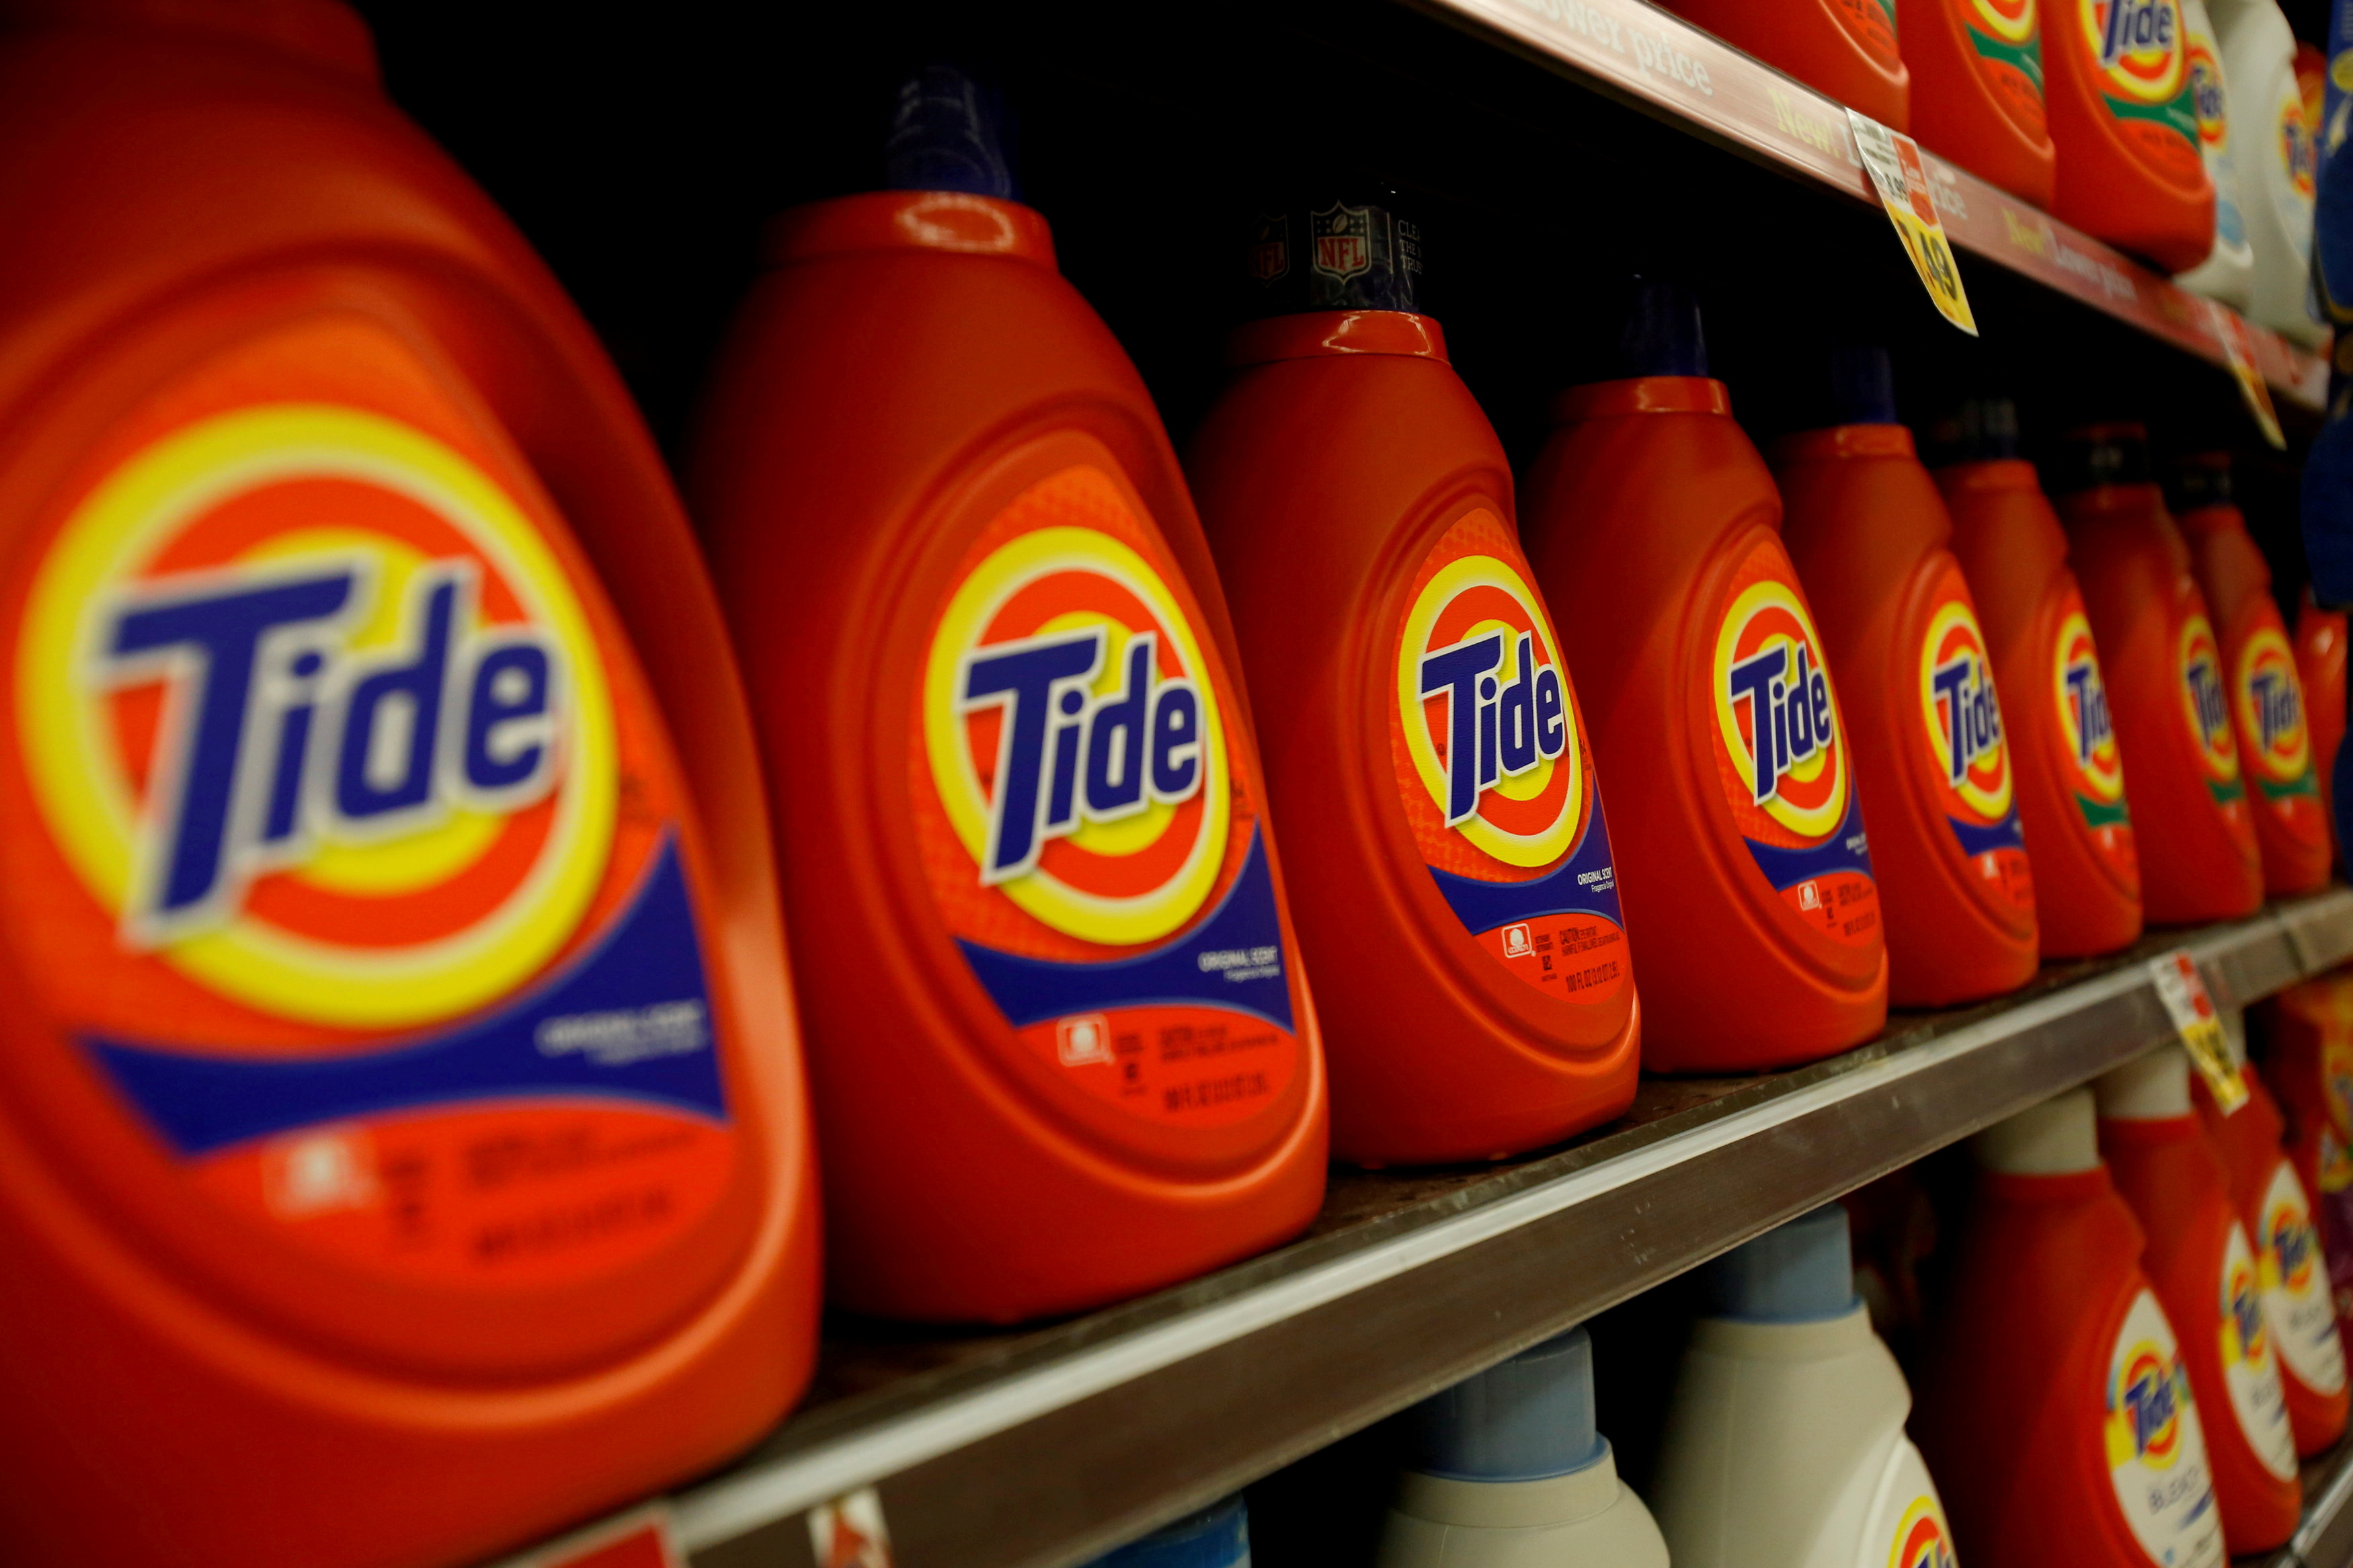 FILE PHOTO: Tide laundry detergent, a product distributed by Procter & Gamble, is pictured on sale at a Ralphs grocery store in Pasadena